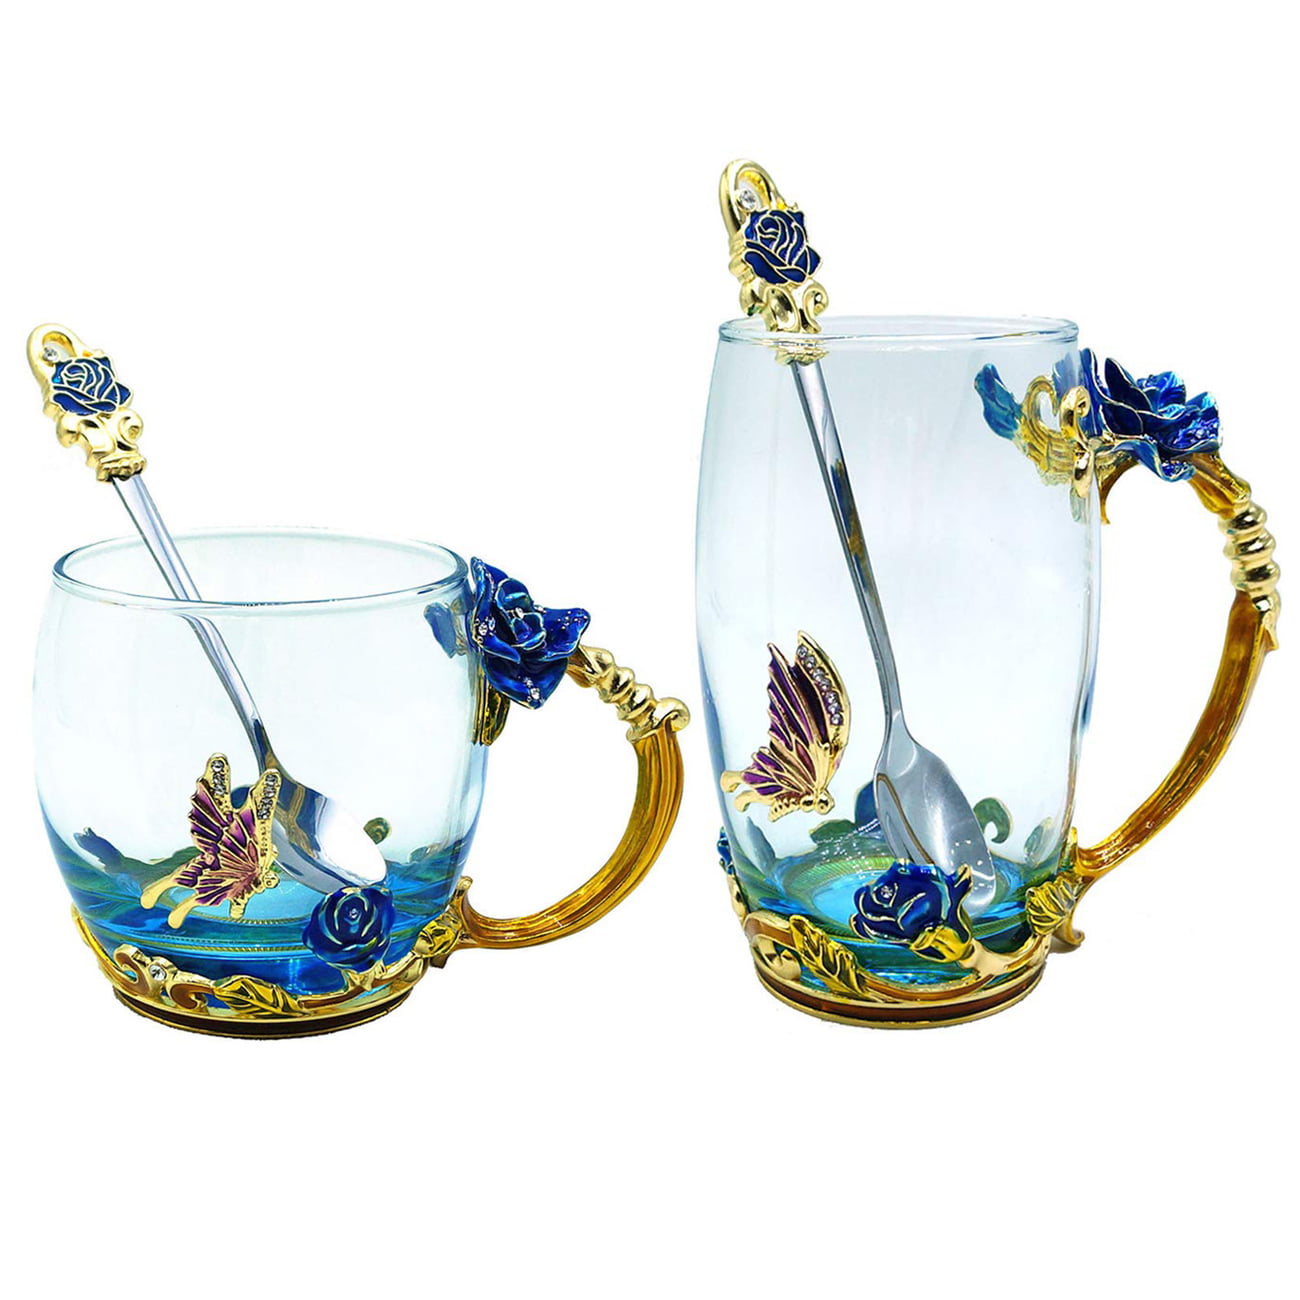 Unique Personalized Birthday Present Ideas for Women Grandma Teachers Coffee Mothers Day Glass Mug Set Lead-Free Handmade Enamel Butterfly and Blue Rose Flower Tea Cups with Handle Blue-Short 